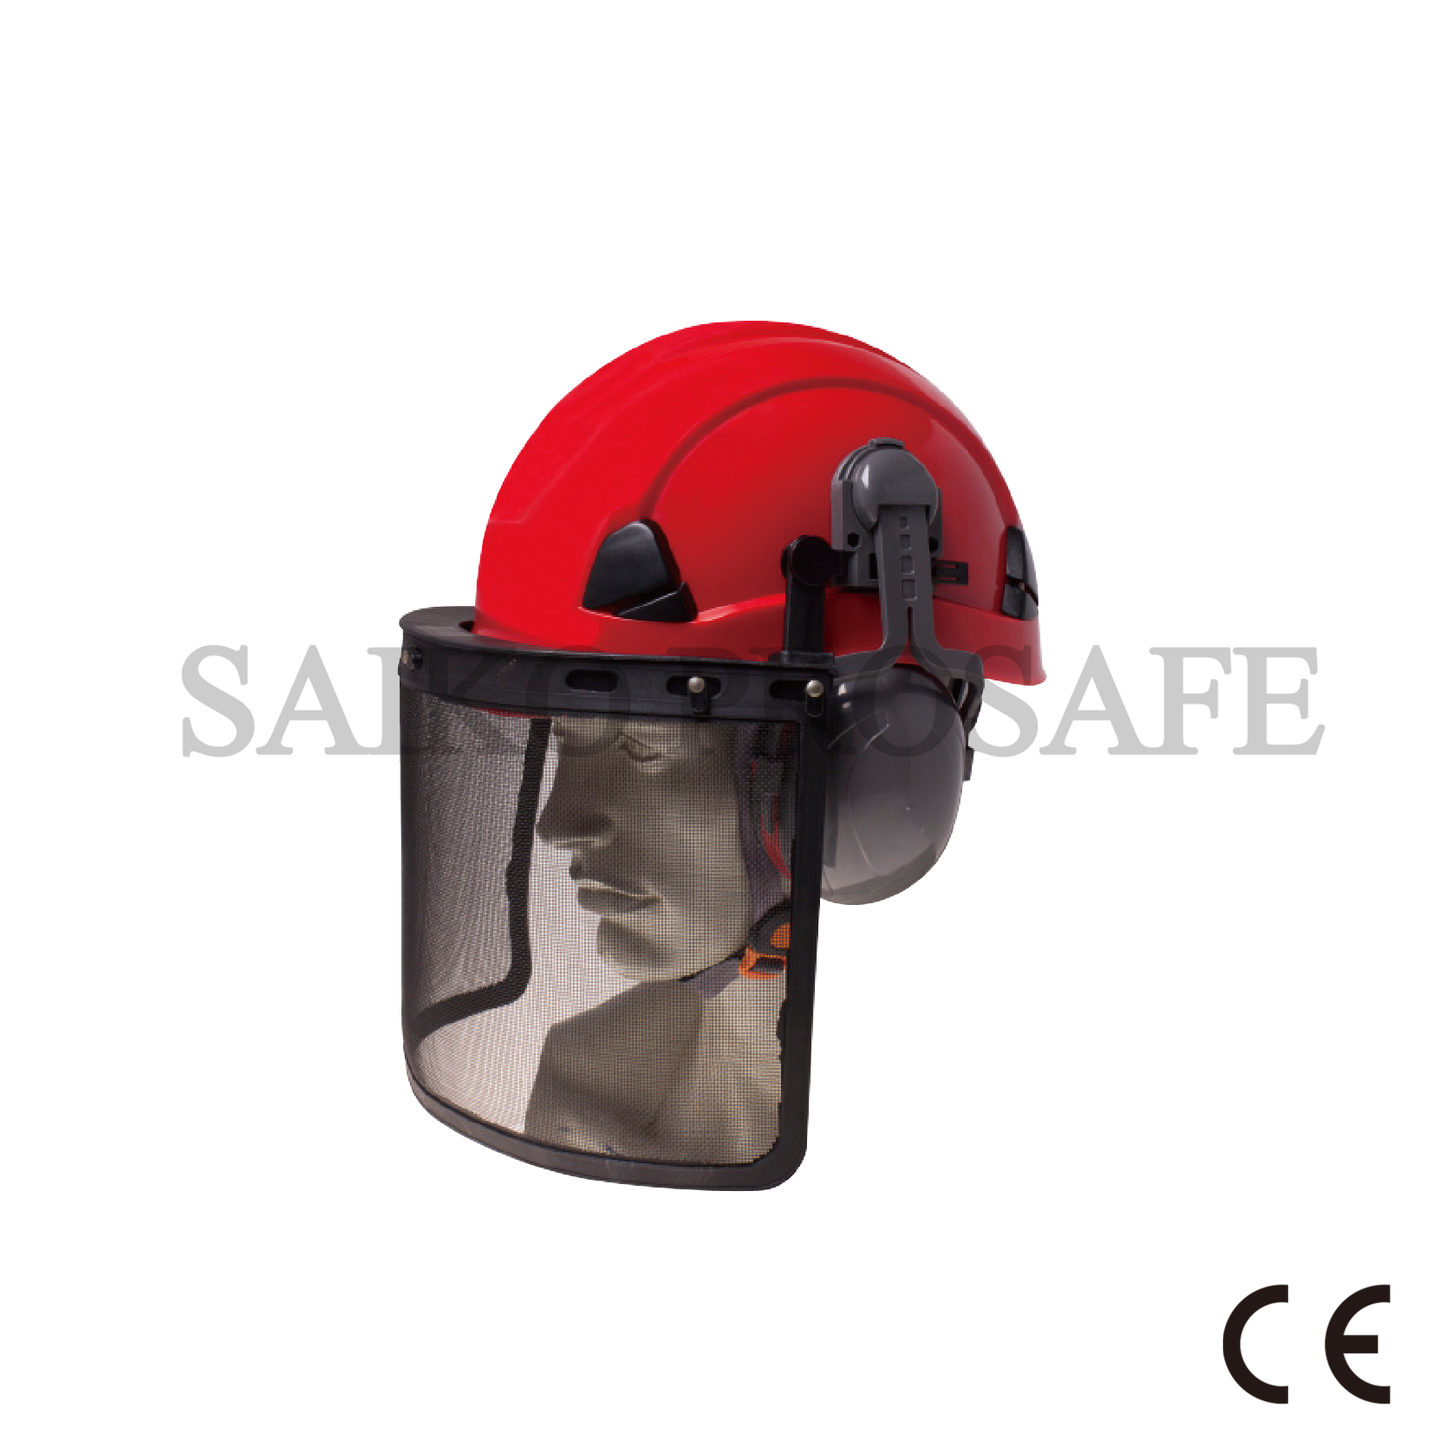 High quality Safety Helmet with Face Shield -  mesh visor and earmuffs- KM1504102-B